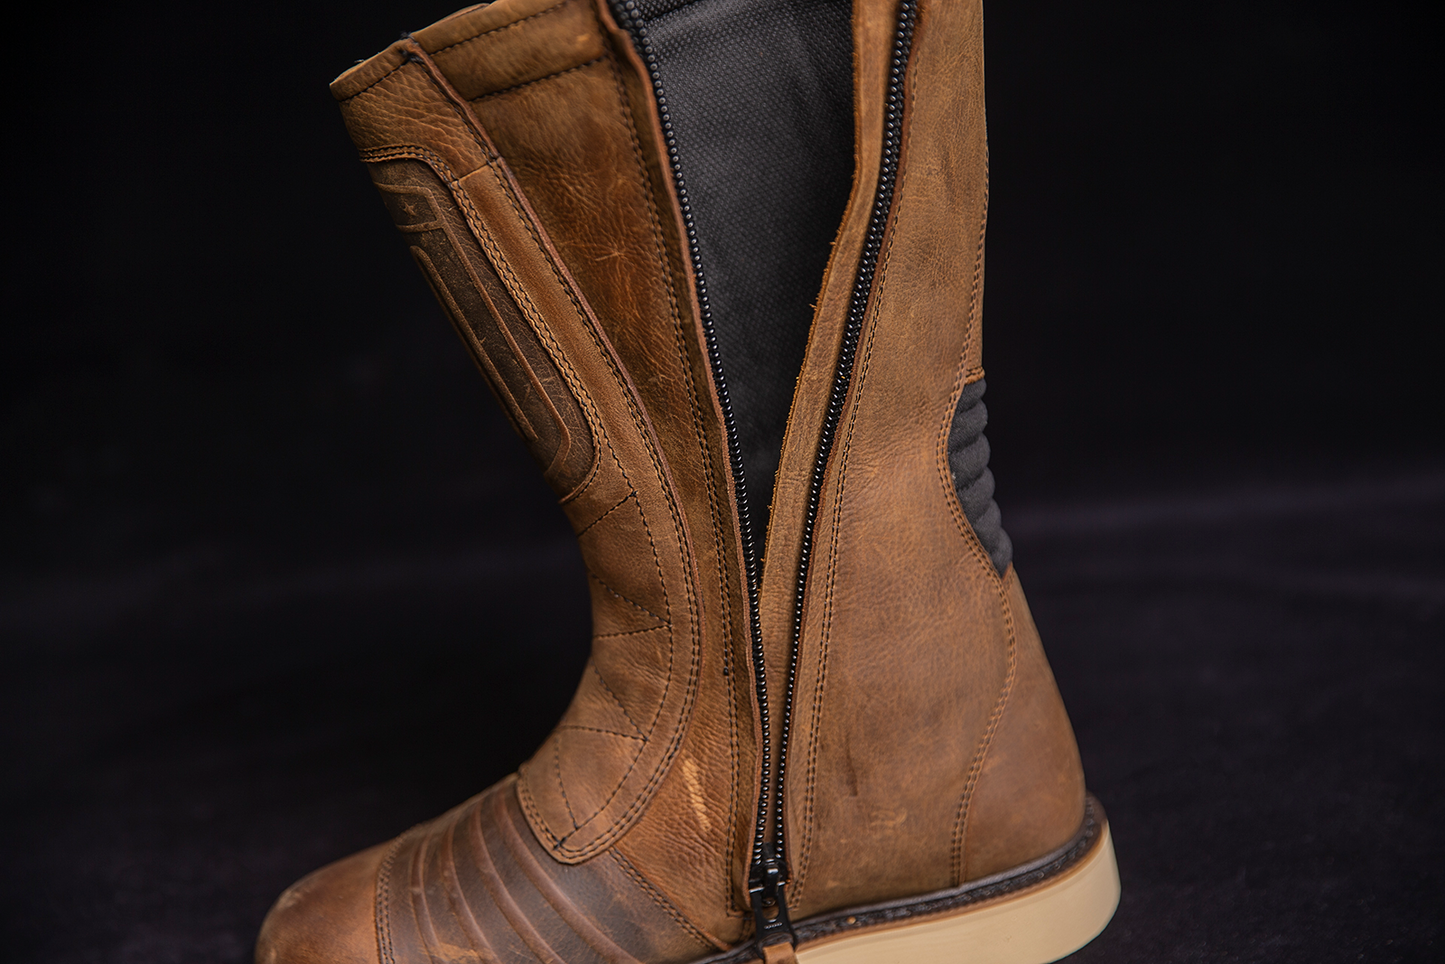 ICON Elsinore 2™ CE Boots - Brown - Size 11.5 3403-1228